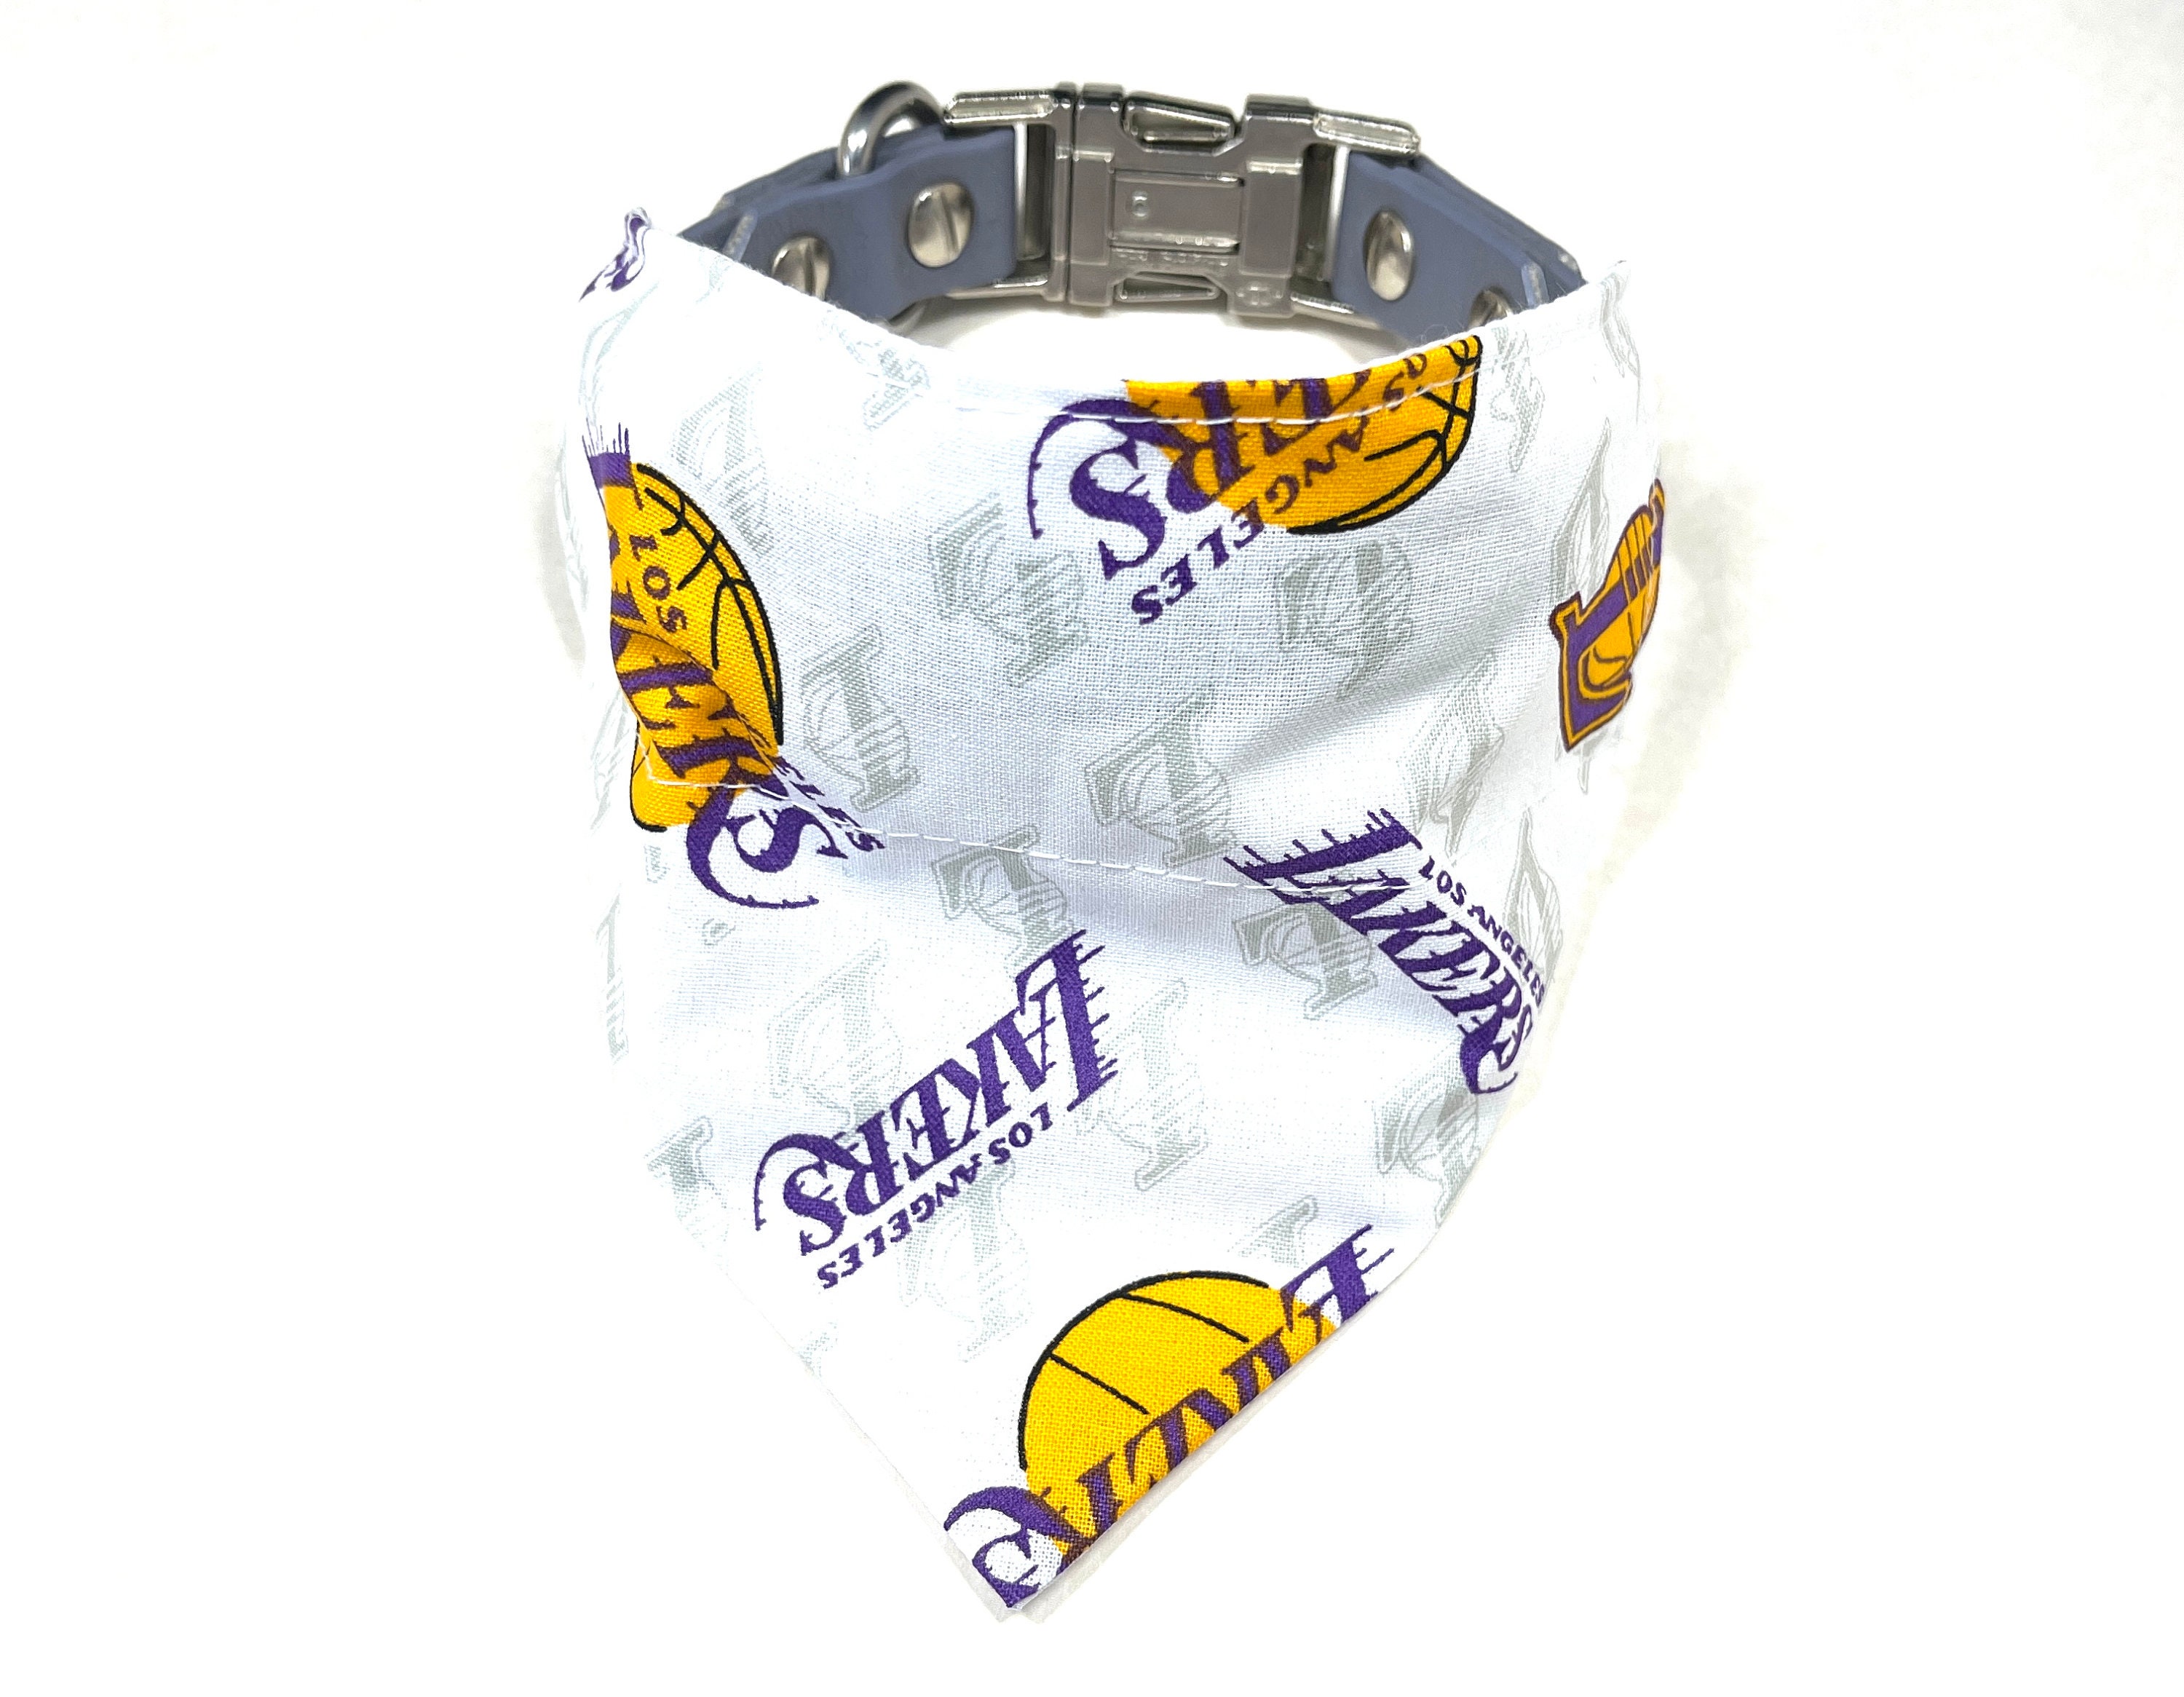 Official Los Angeles Lakers Pet Gear, Collars, Leashes, Pet Toys